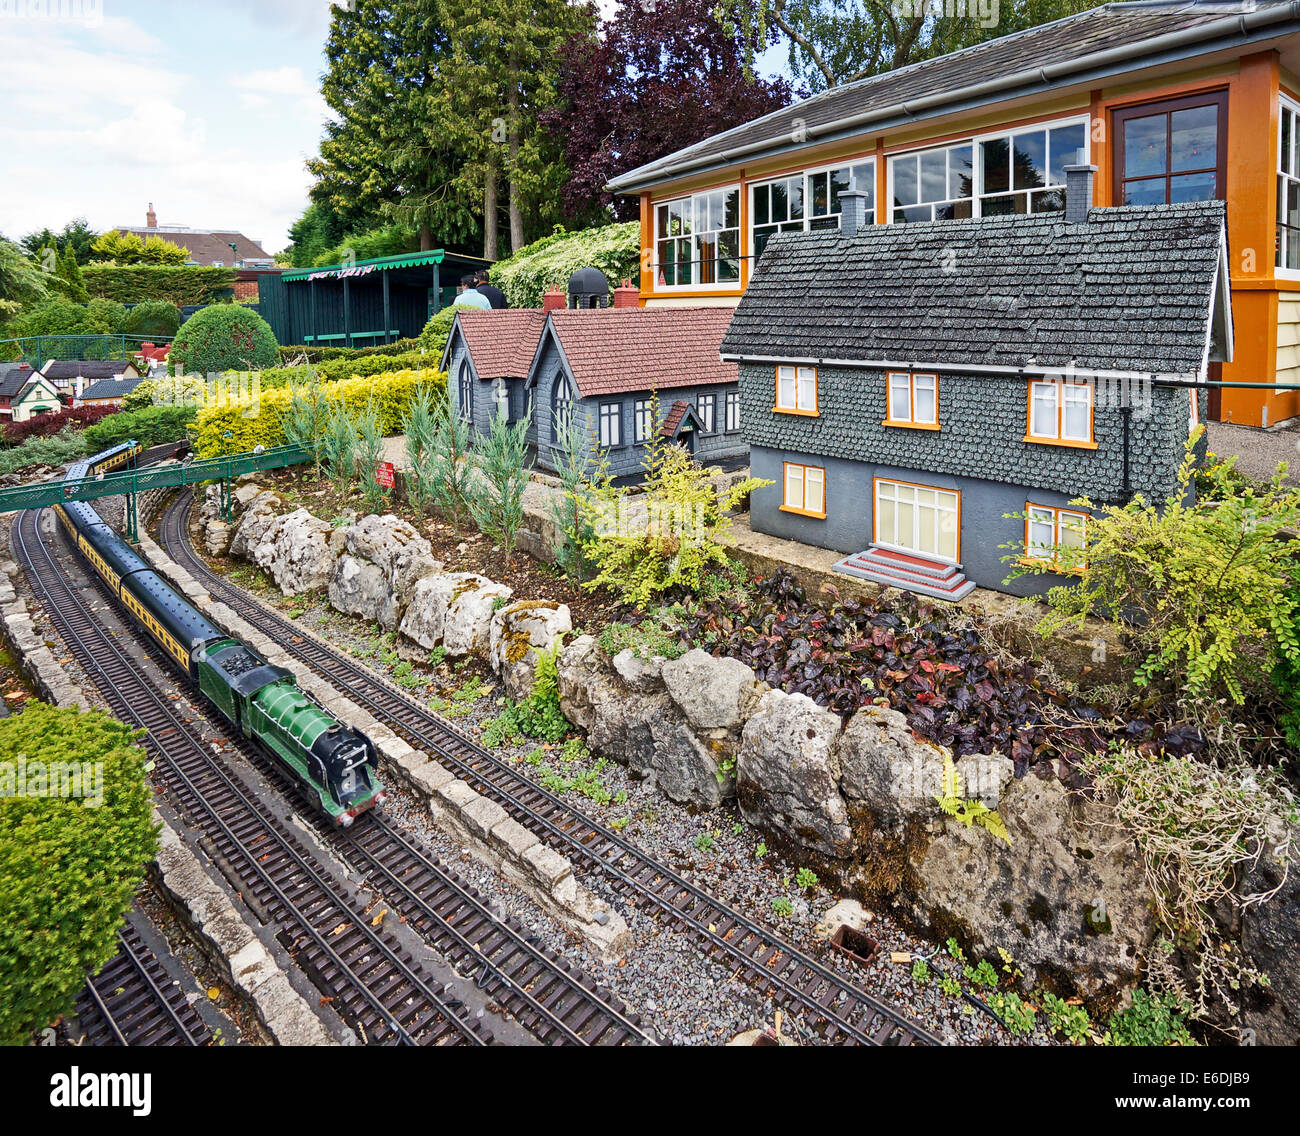 Railway with steam train at Beconscot Model Village & Railway Beaconsfield England Stock Photo